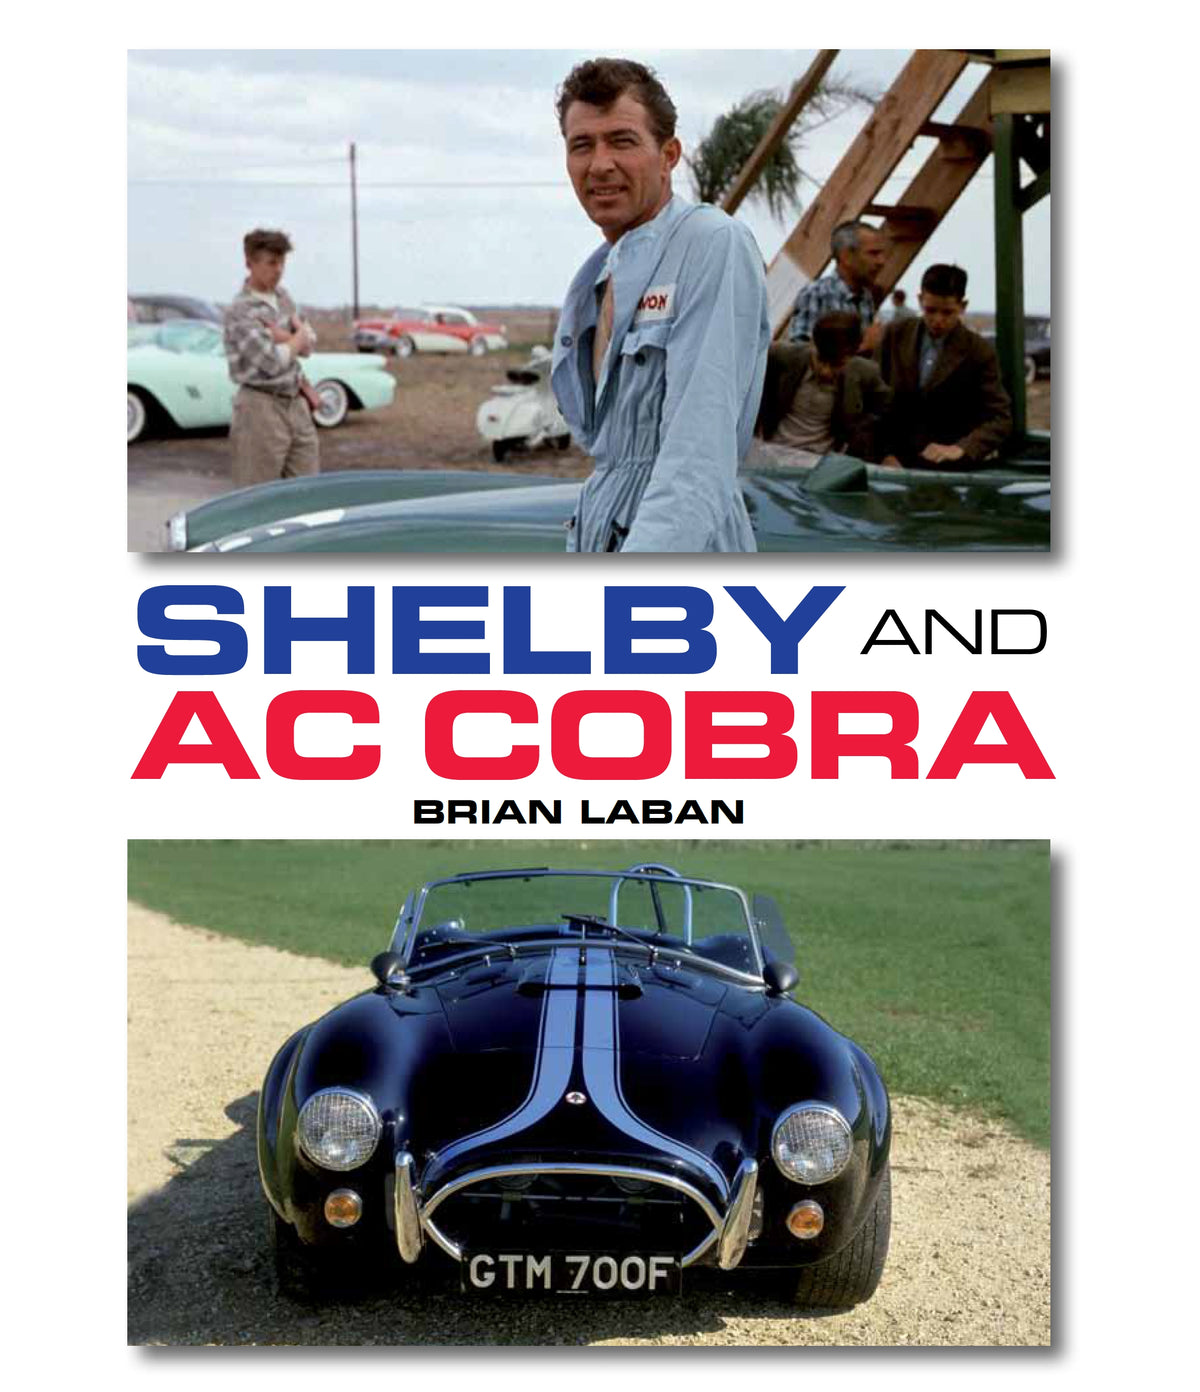 Shelby and AC Cobra